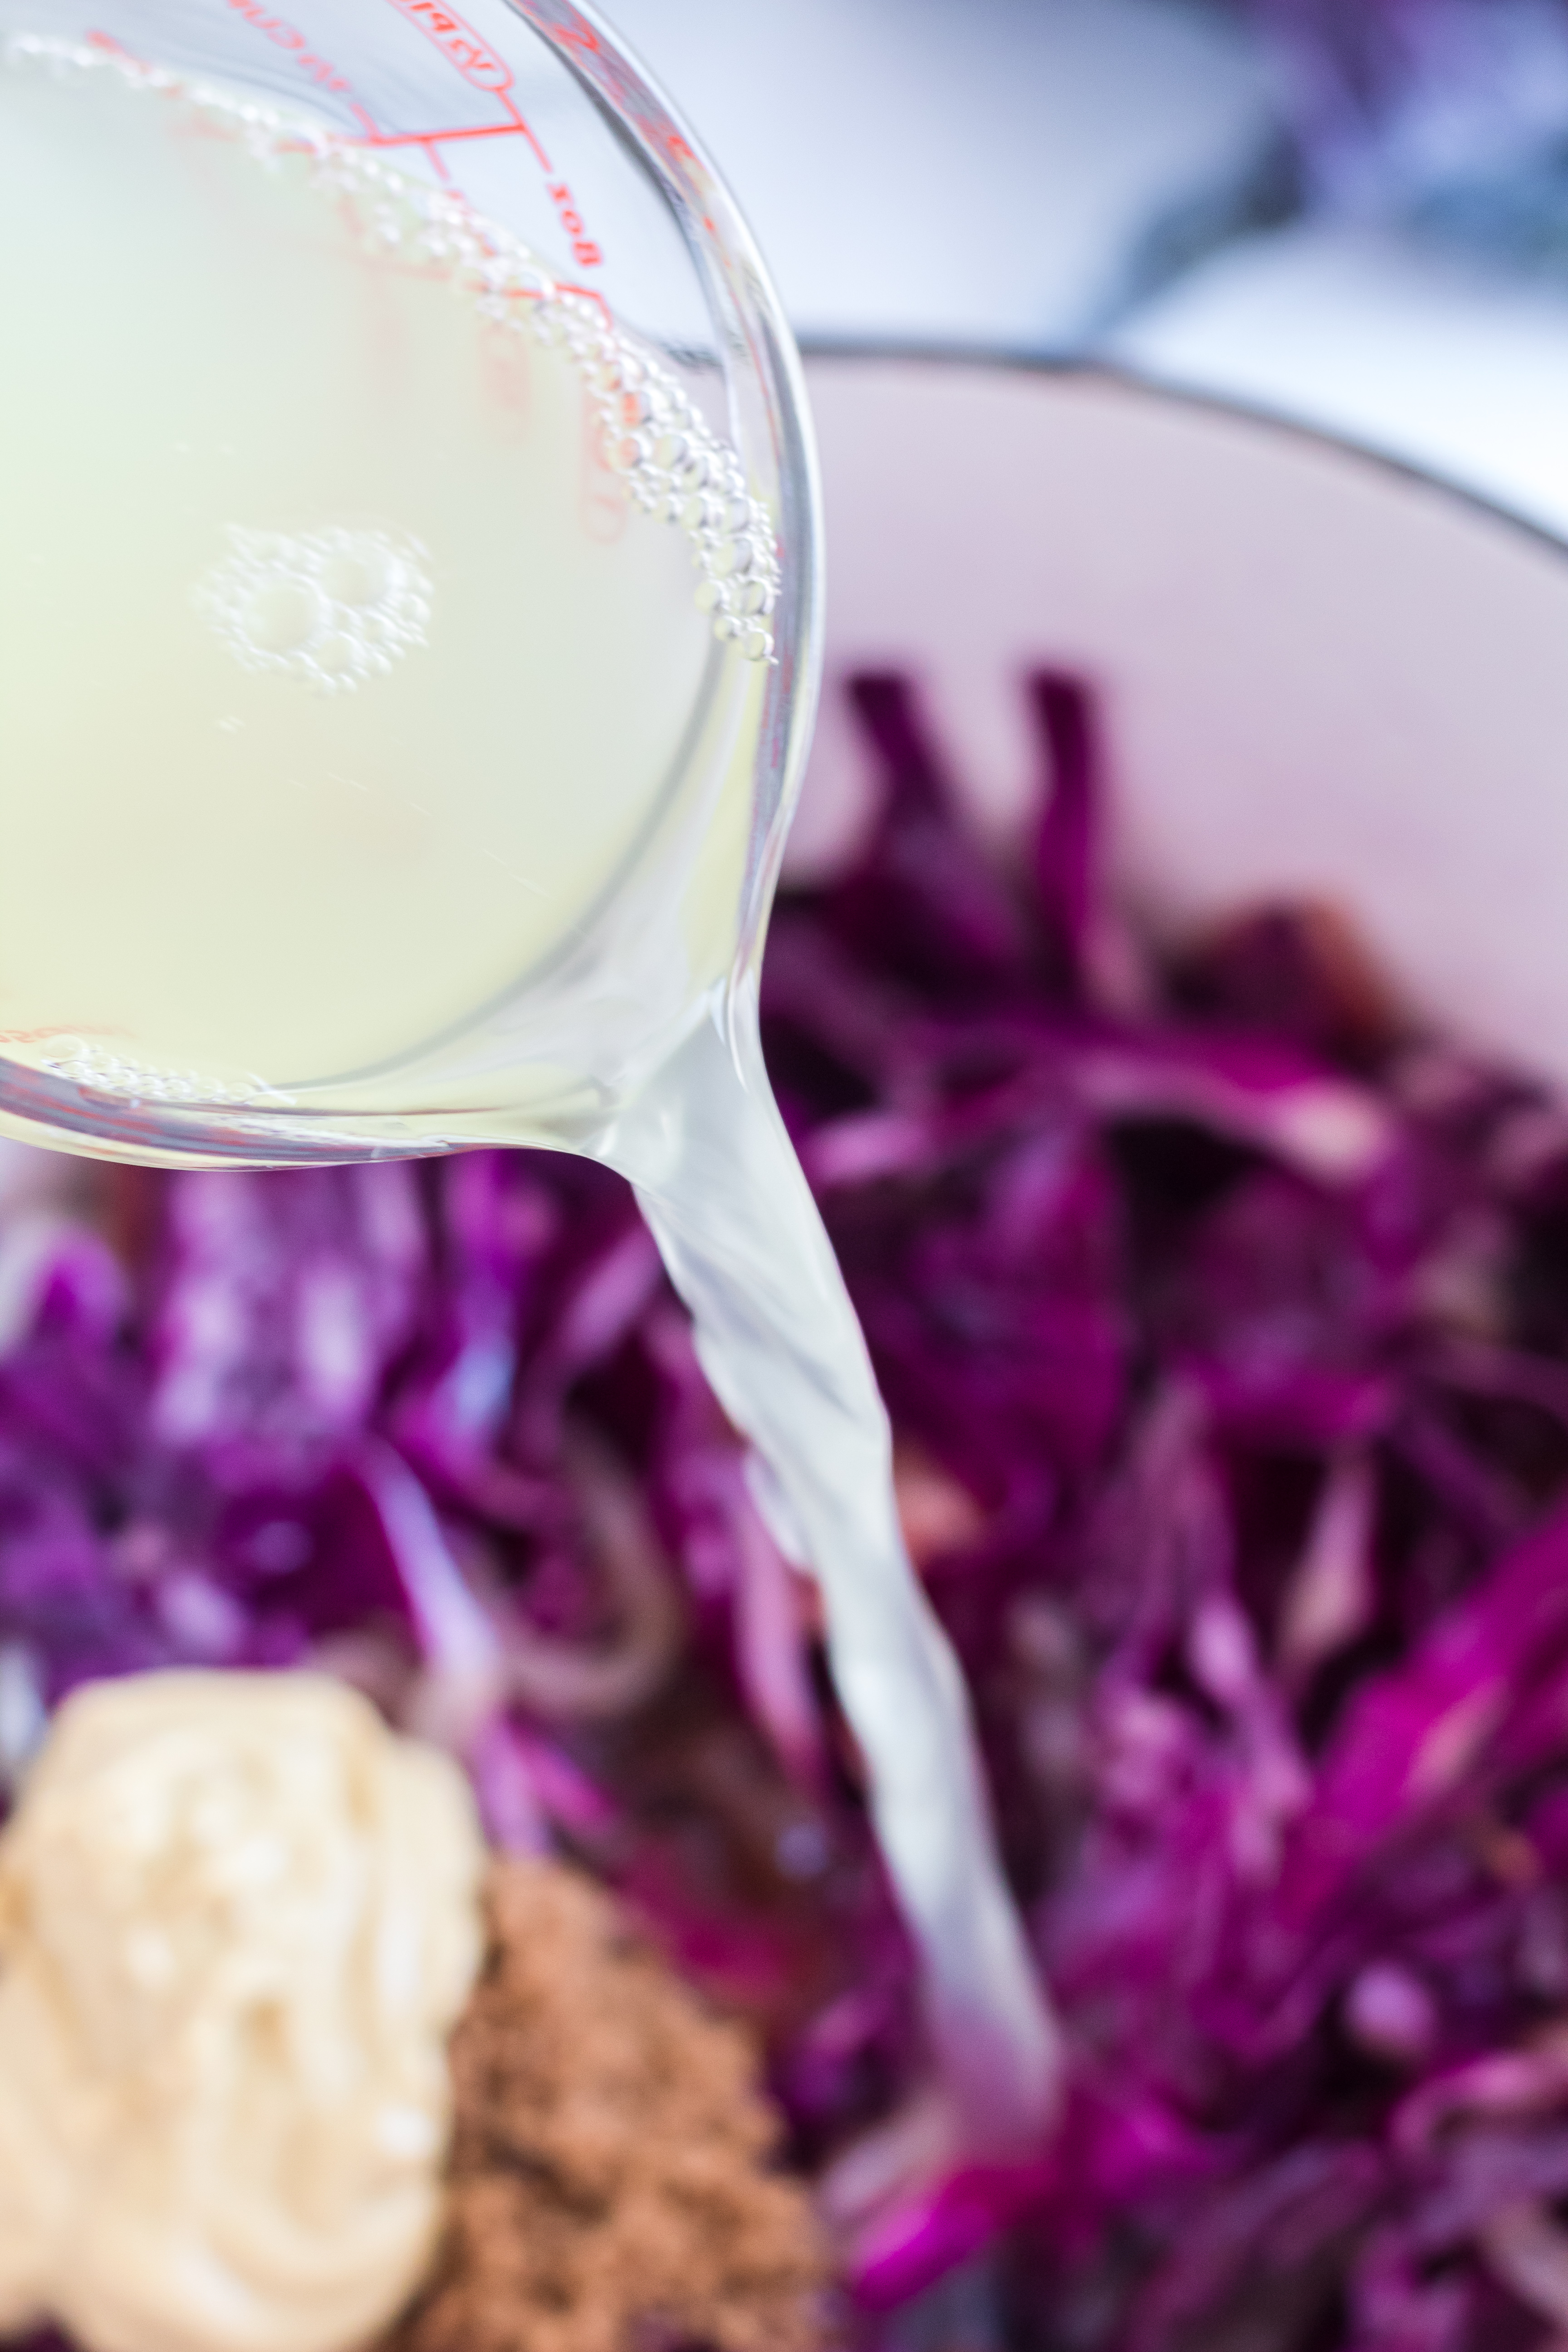 Sauteed Red Cabbage